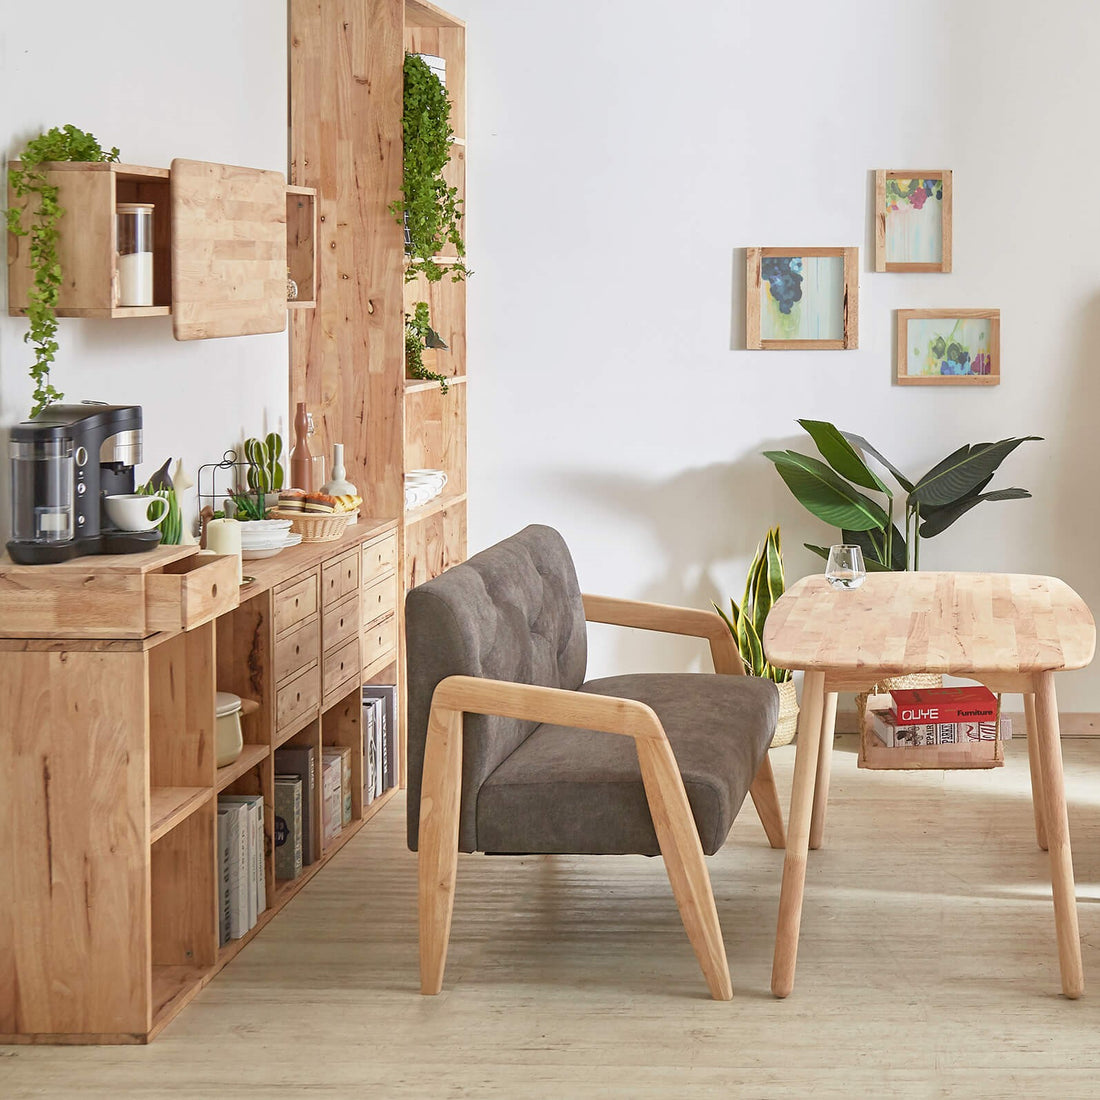 Building a Sustainable Dining Room with Eco-Friendly Furniture